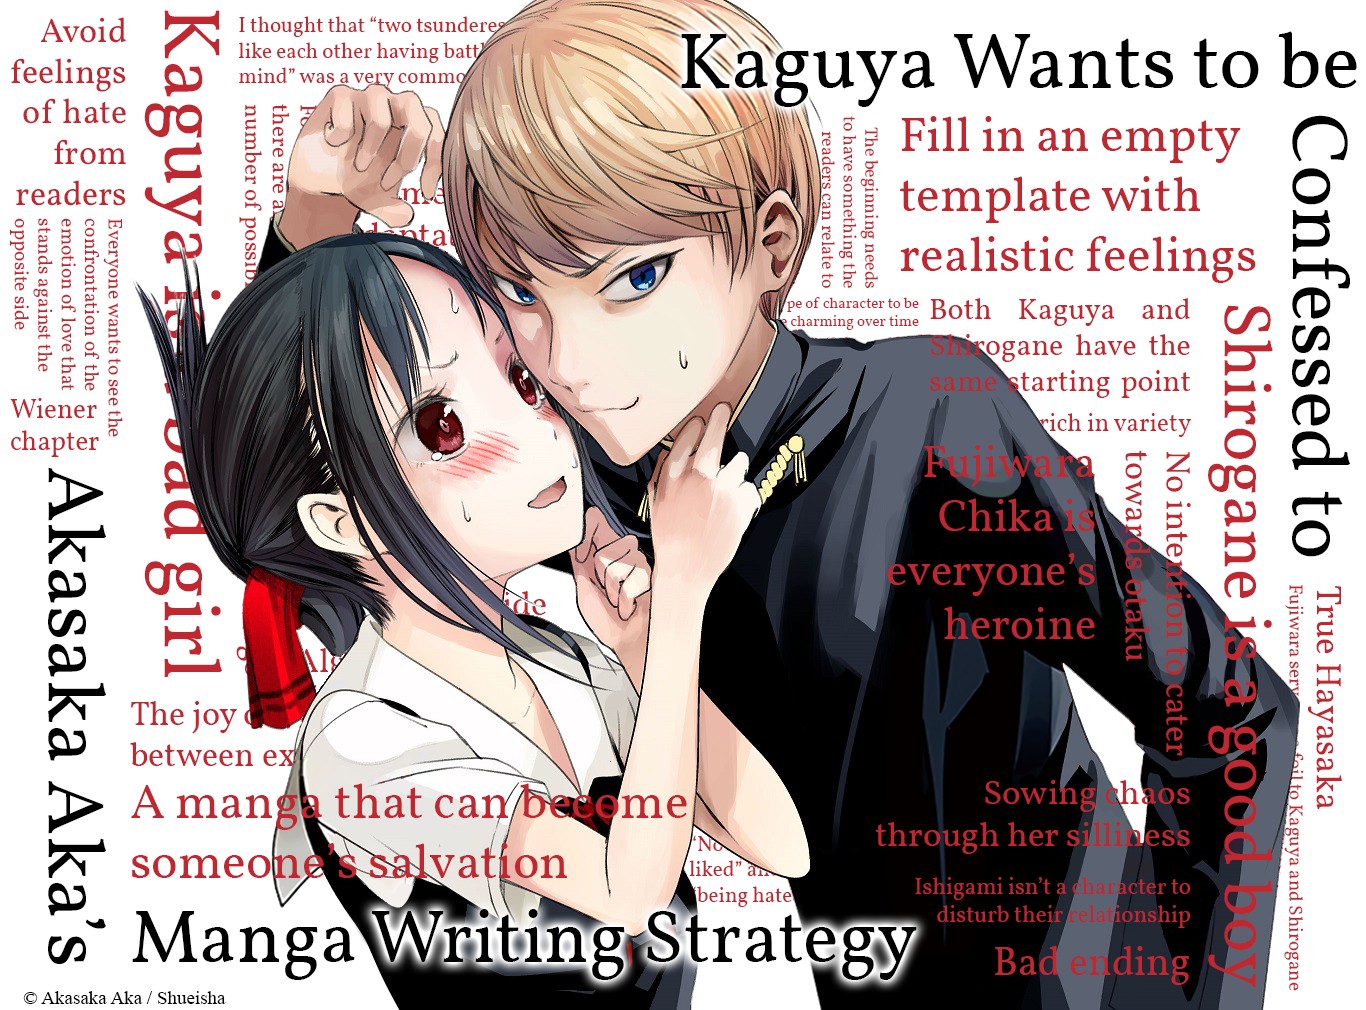 We Want to Talk About Kaguya